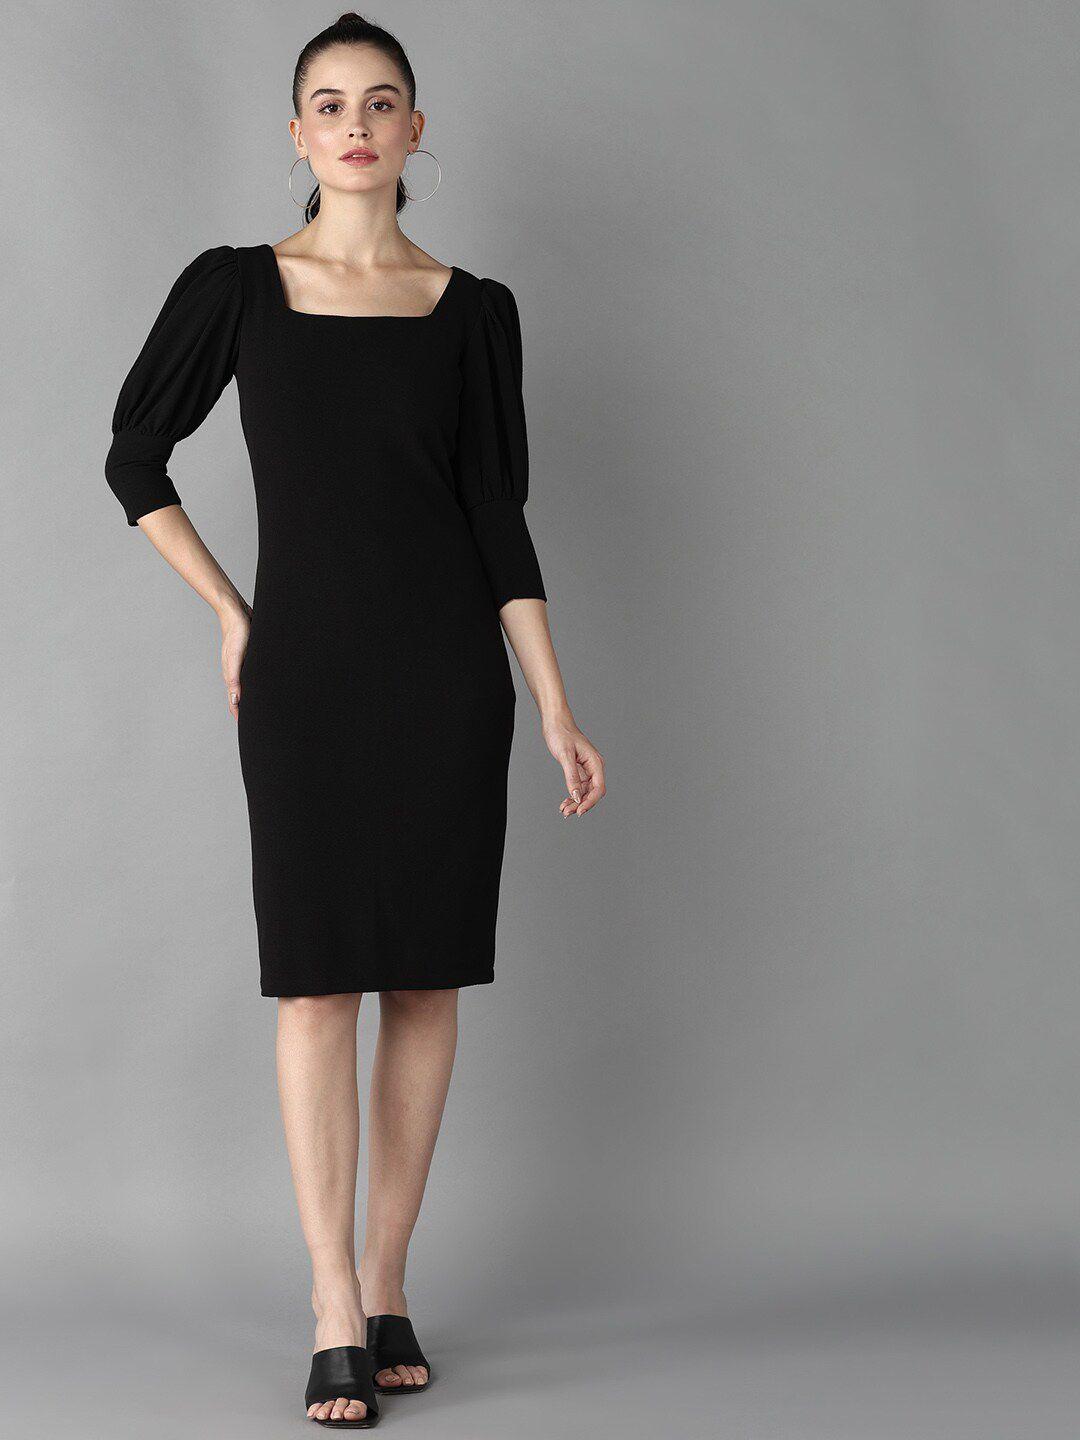 the roadster lifestyle co. black square neck puff sleeves sheath dress